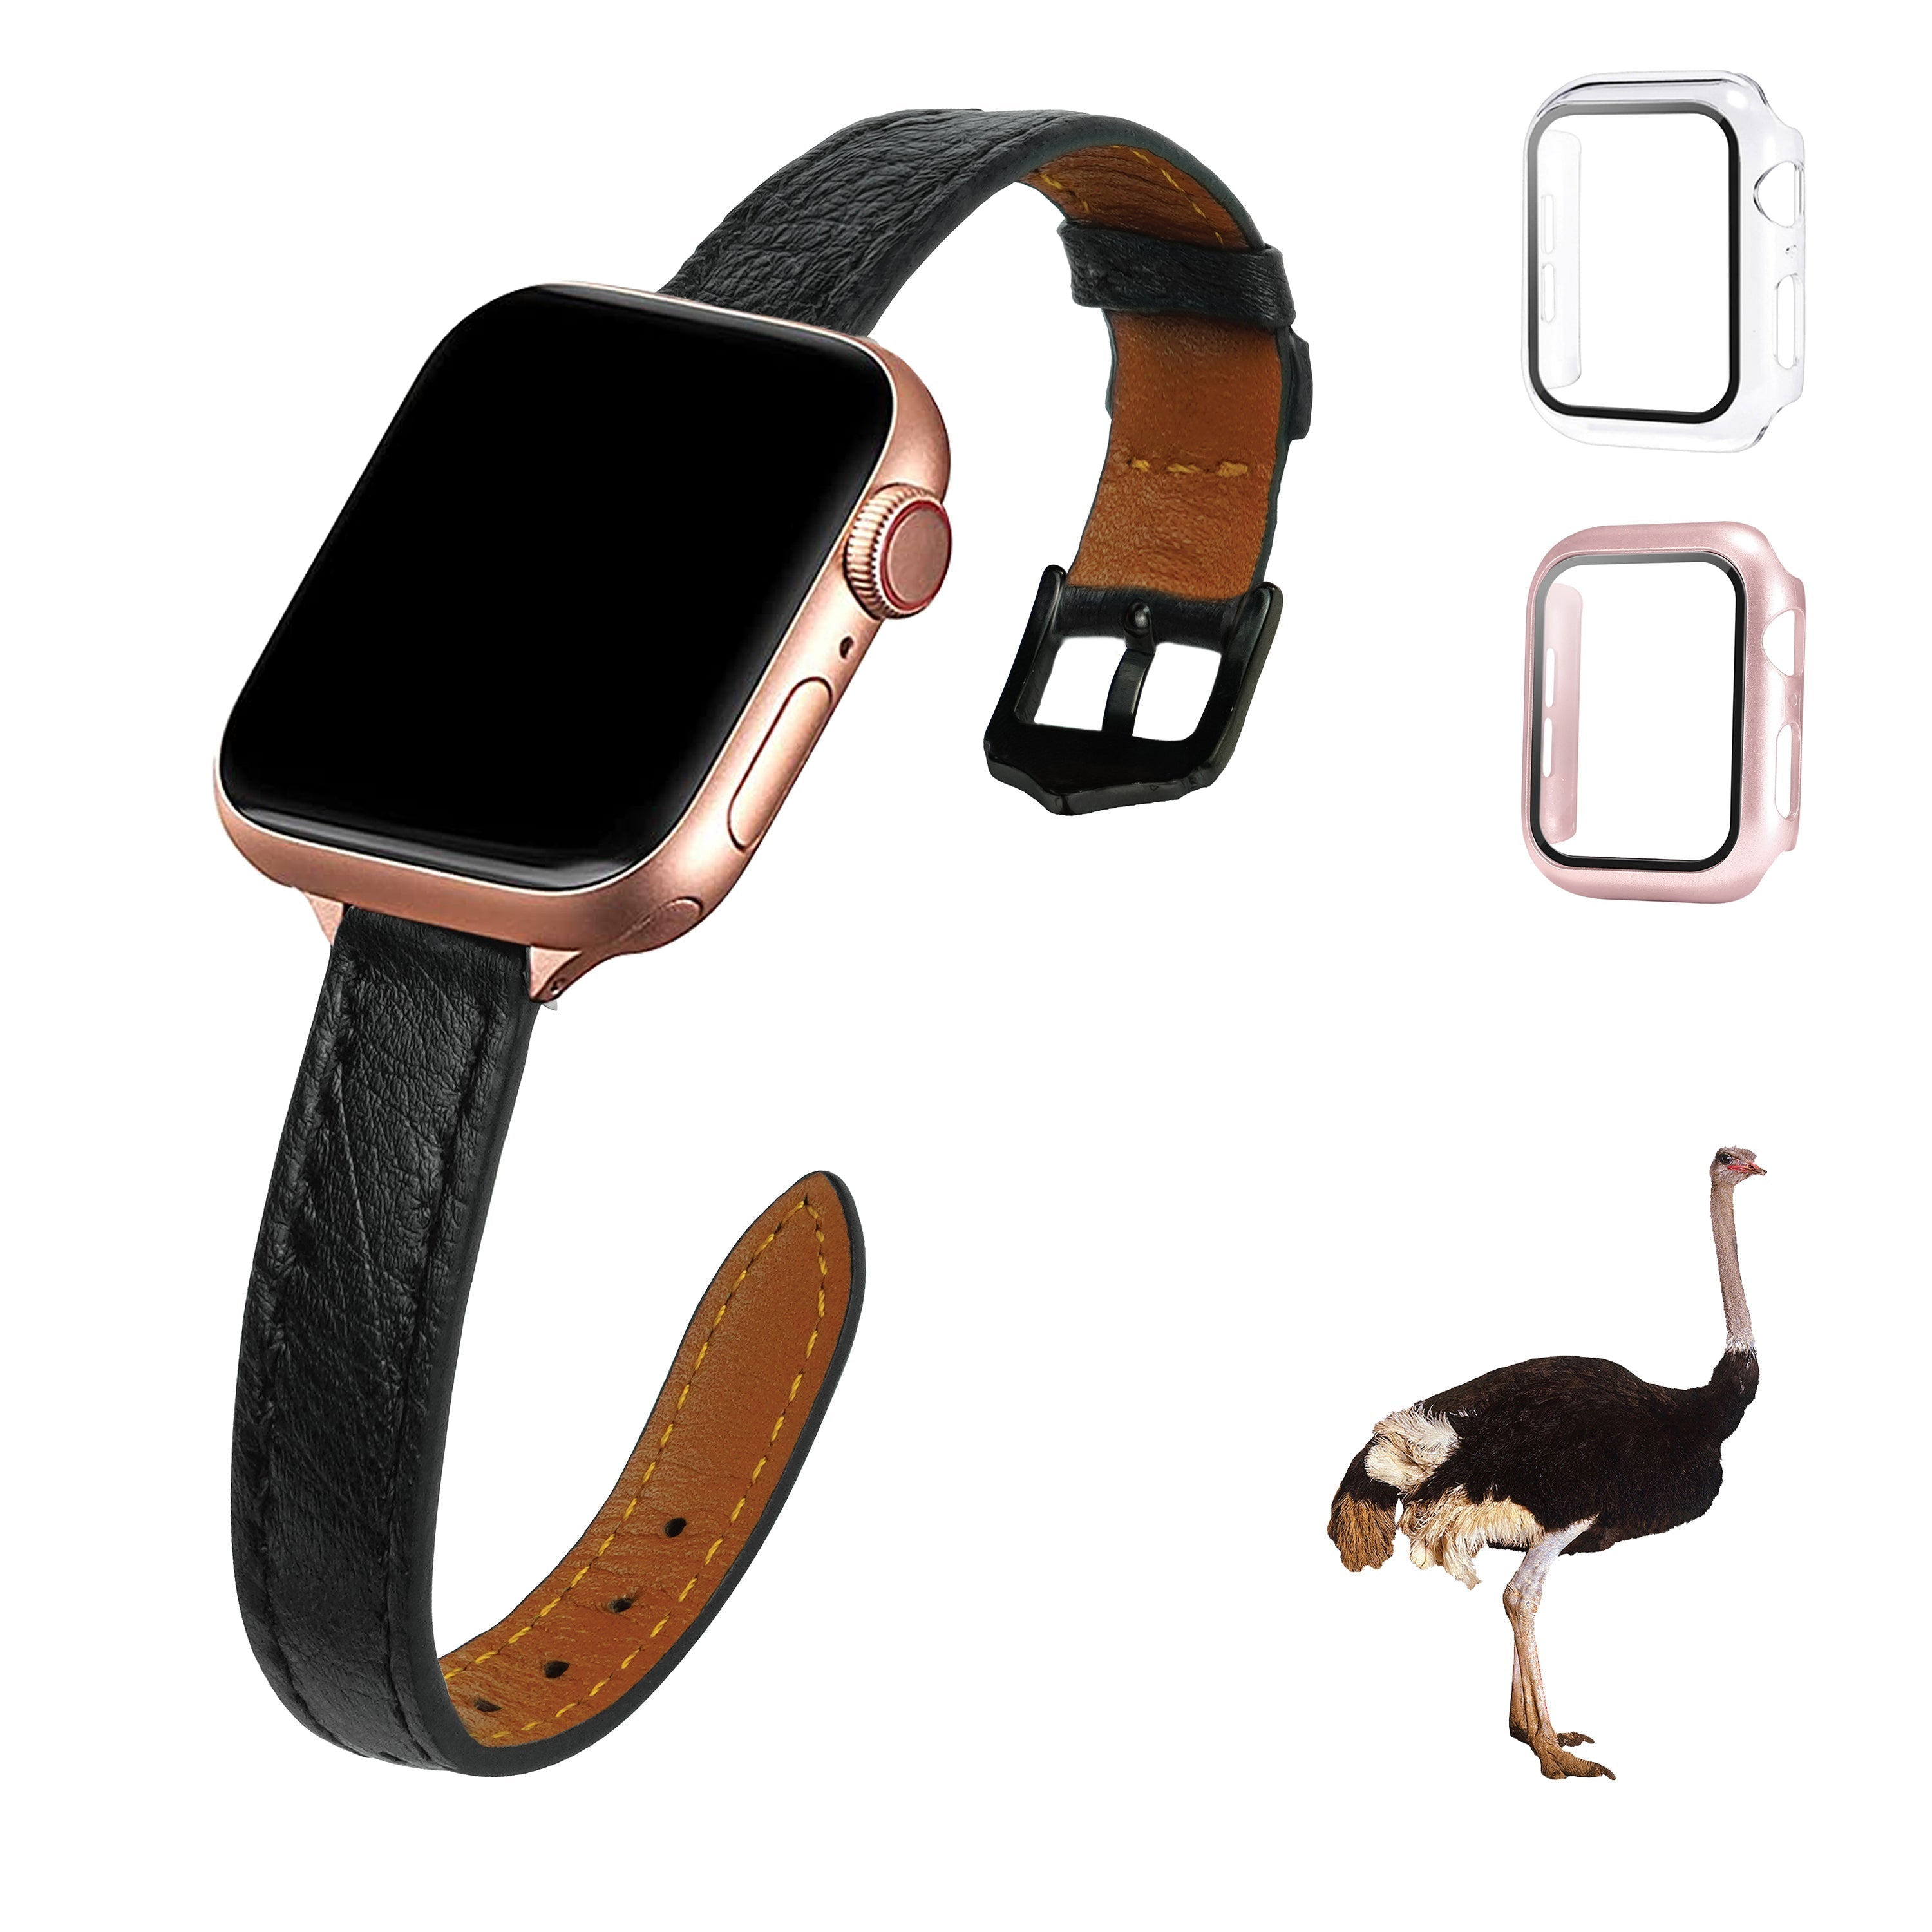 Black Flat Ostrich Leather Band Compatible Apple Watch Iwatch 42mm Screen Protector Case Elegant Vintage Replacement Strap For Smartwatch Series 1 2 3 Leather Handmade AW-181B-W-42MM…